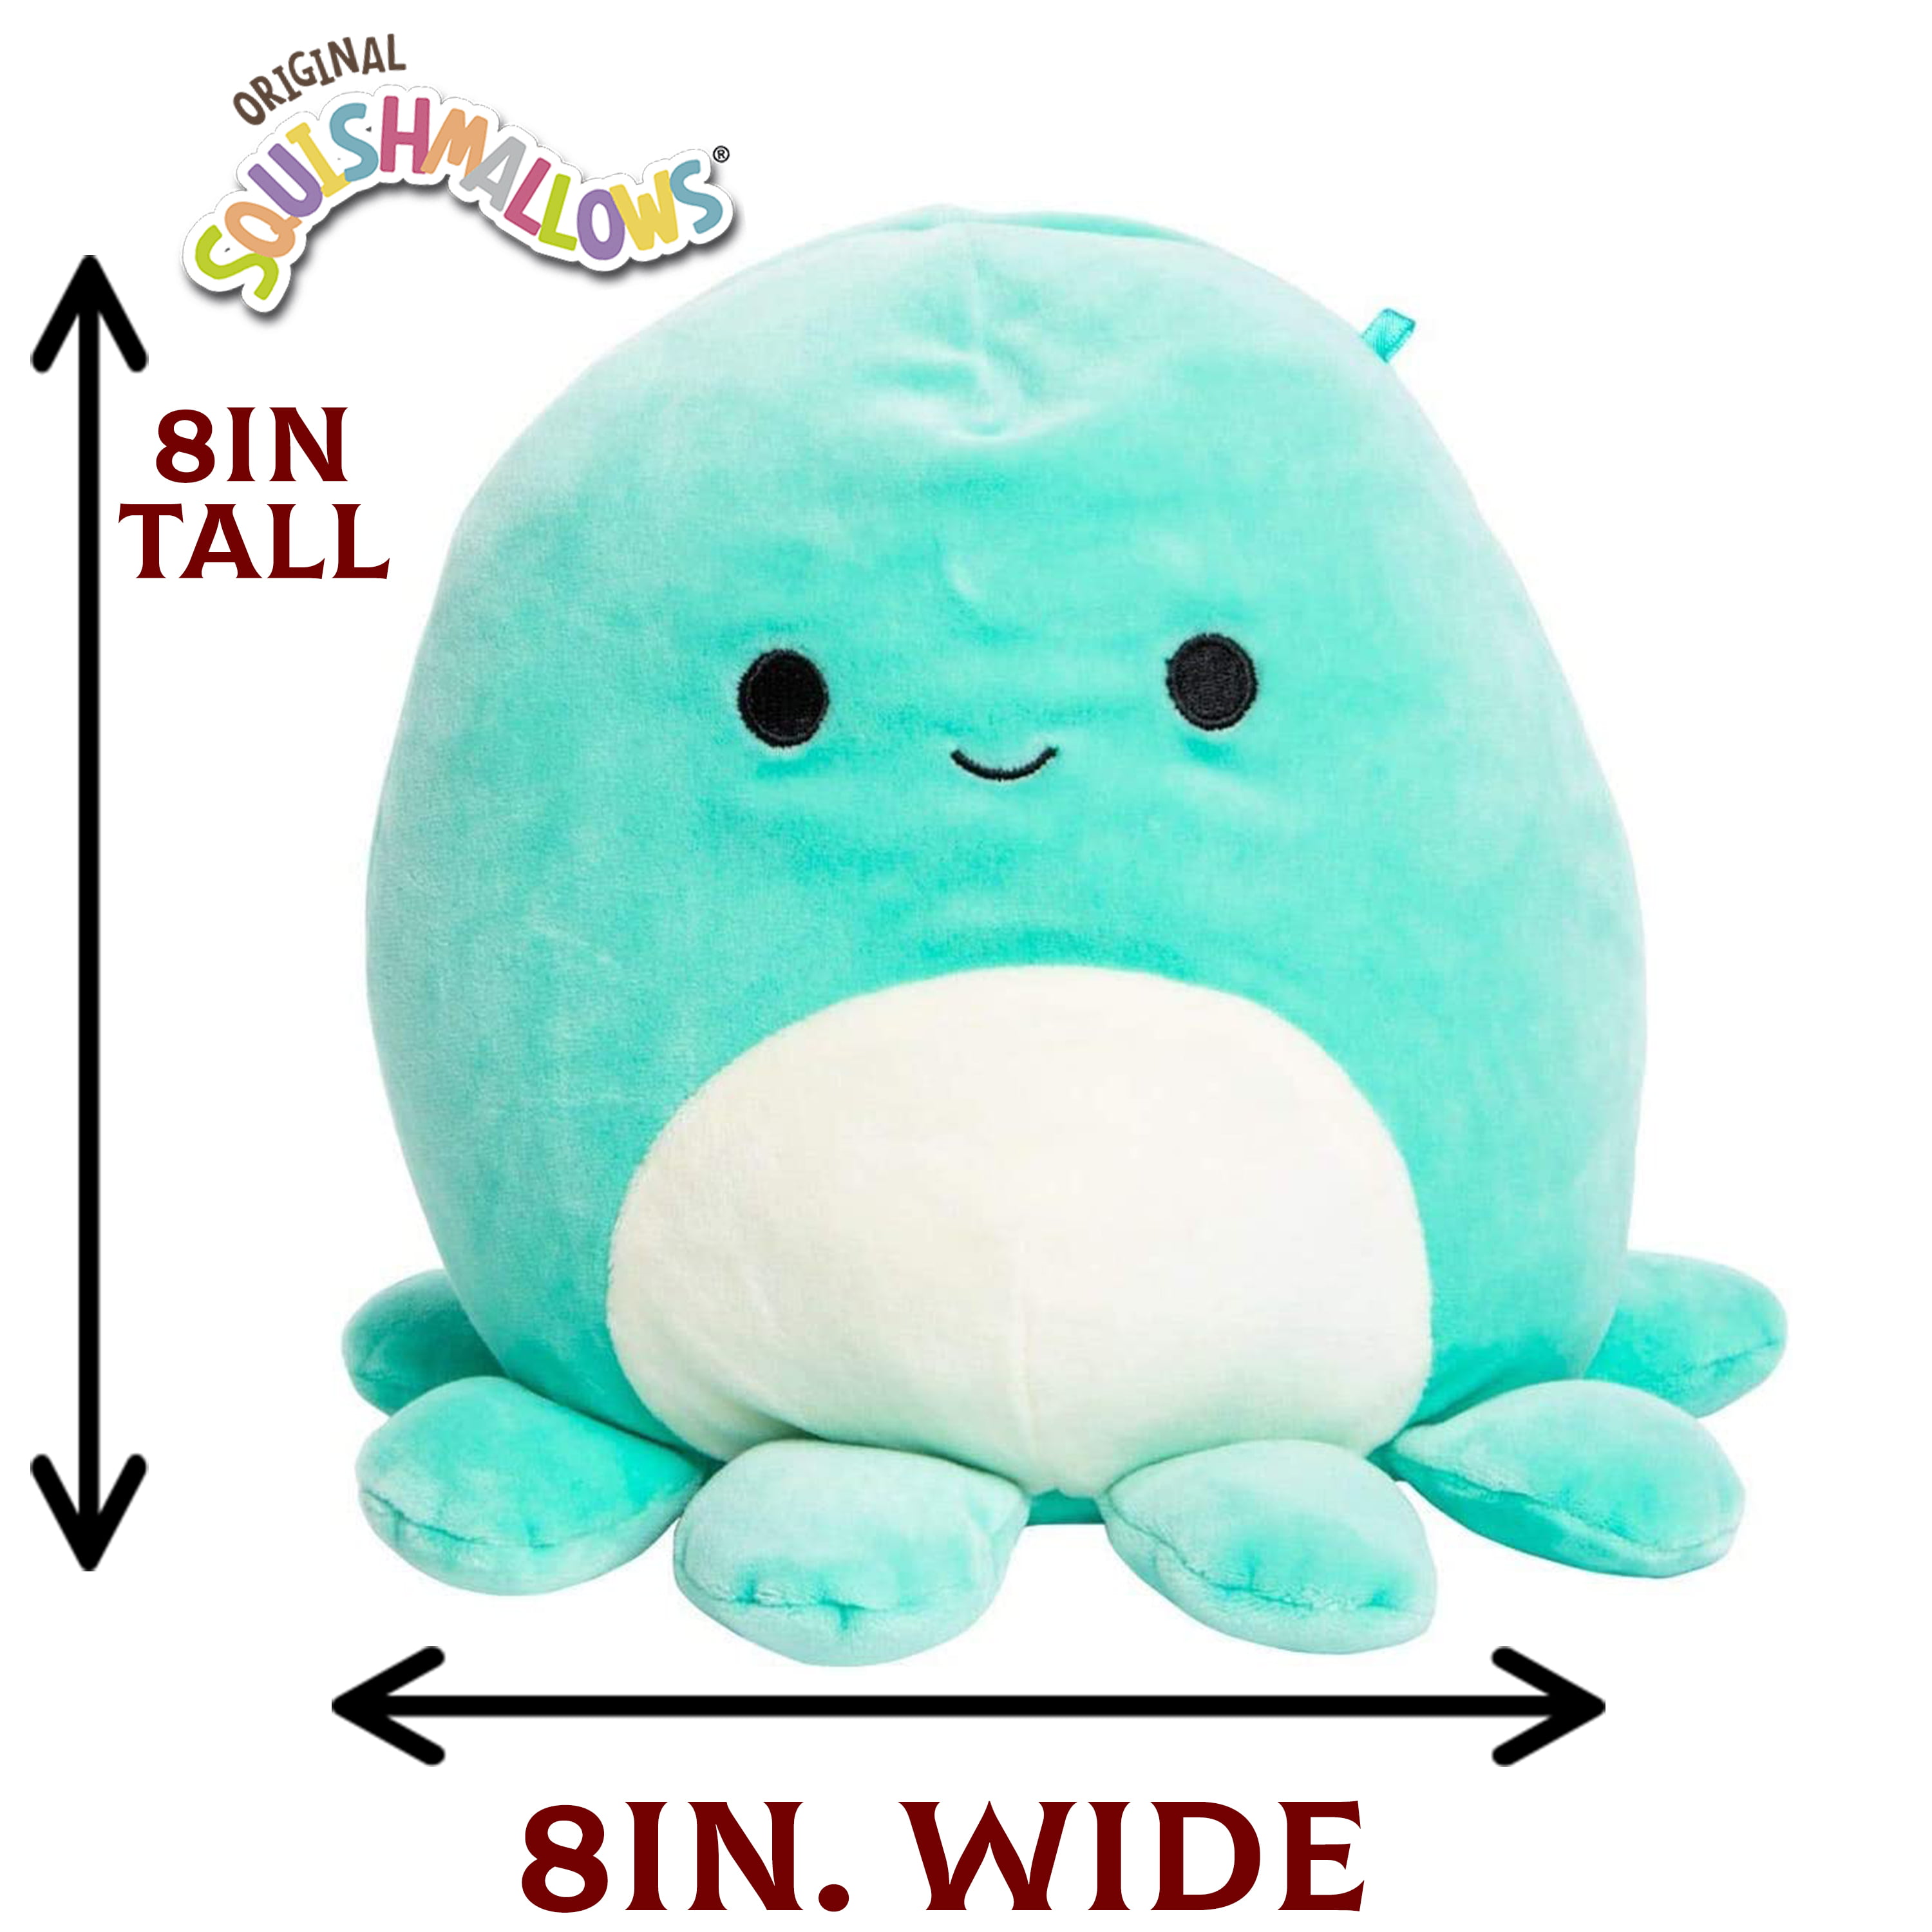 K16379E8 for sale online Kellytoy Squishmallow Octopus 8 inch Sea Creature 